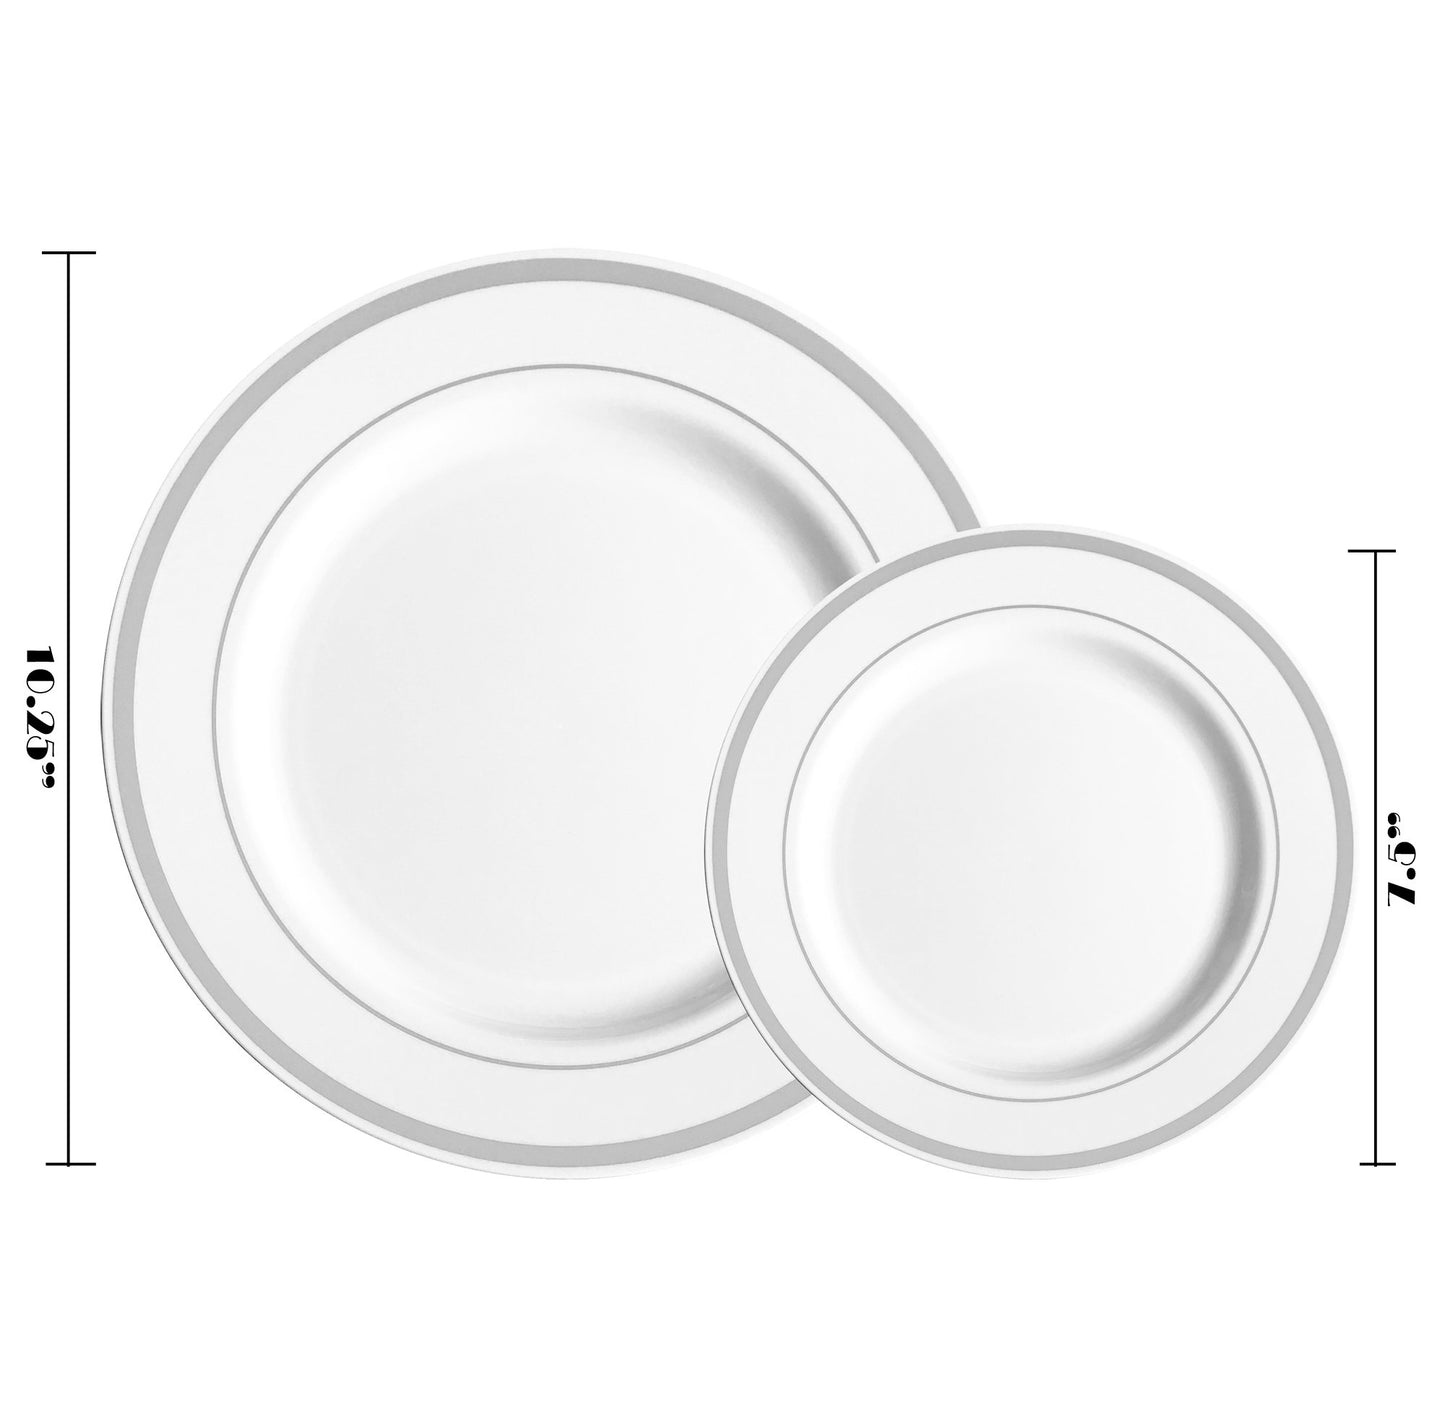 JL Prime 50 Piece Silver Plastic Plates for 25 Guests, Heavy Duty Reusable Disposable Plastic Plates with Silver Rim for Party and Wedding with 25 Dinner Plates and 25 Salad Plates